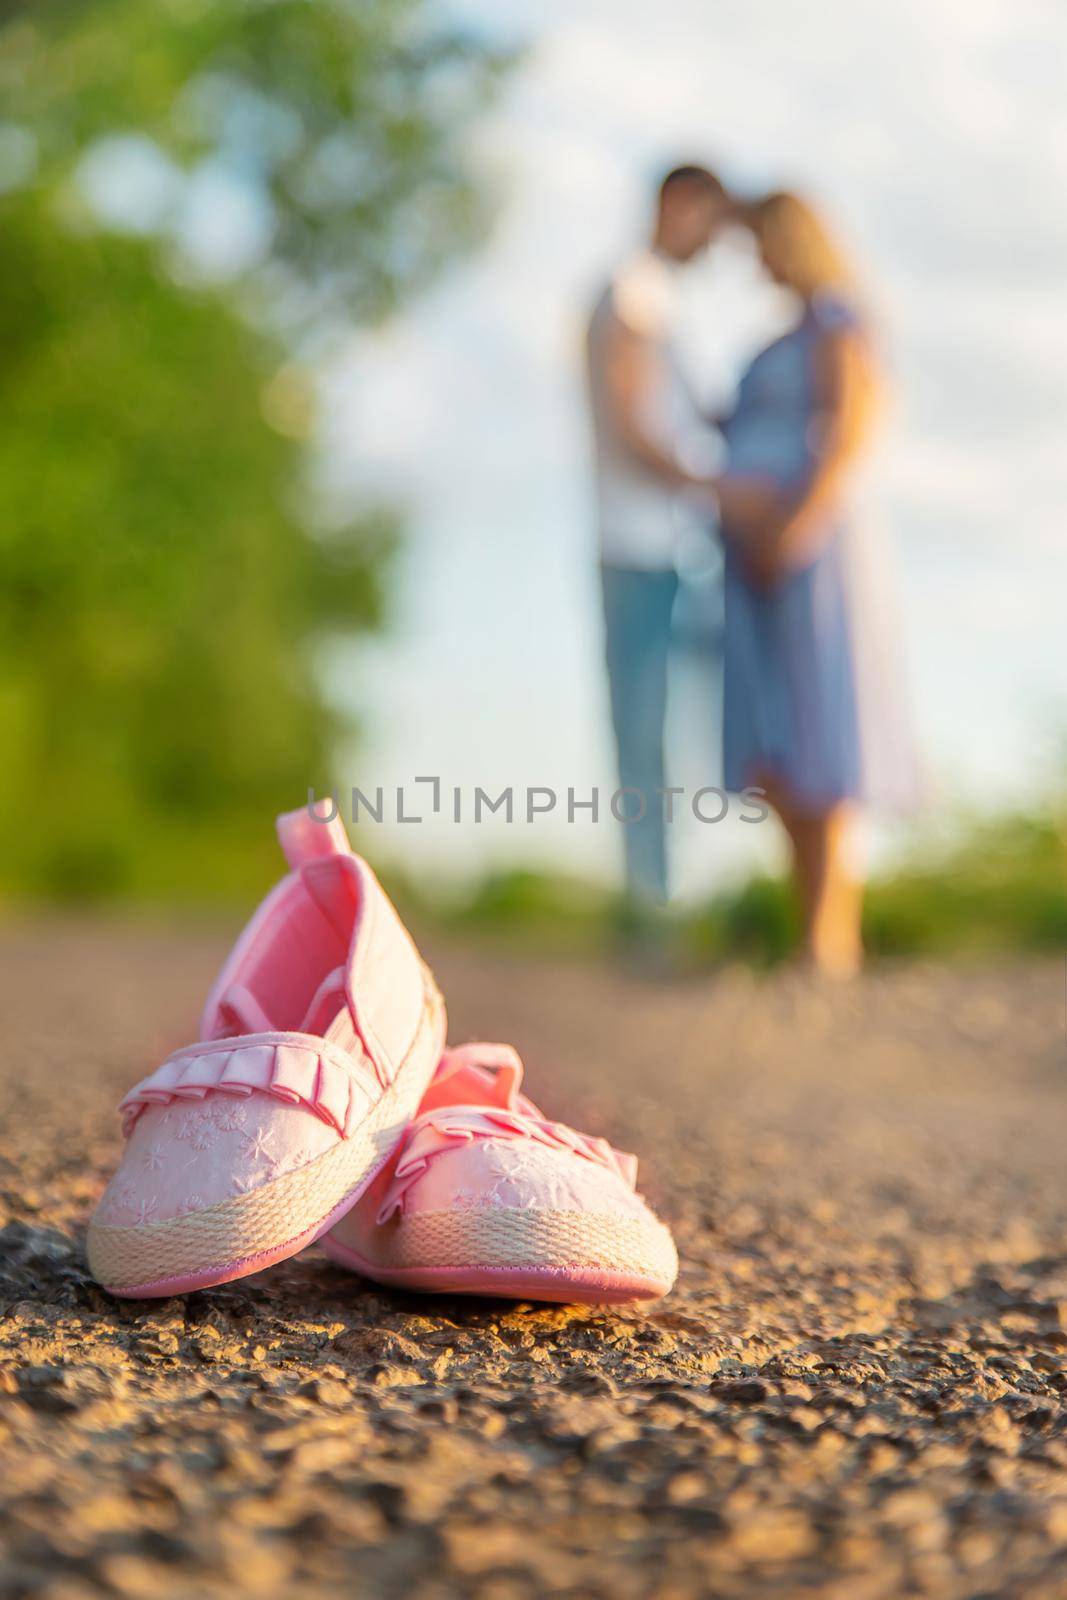 Pregnant woman and man baby shoes. Selective focus. nature.